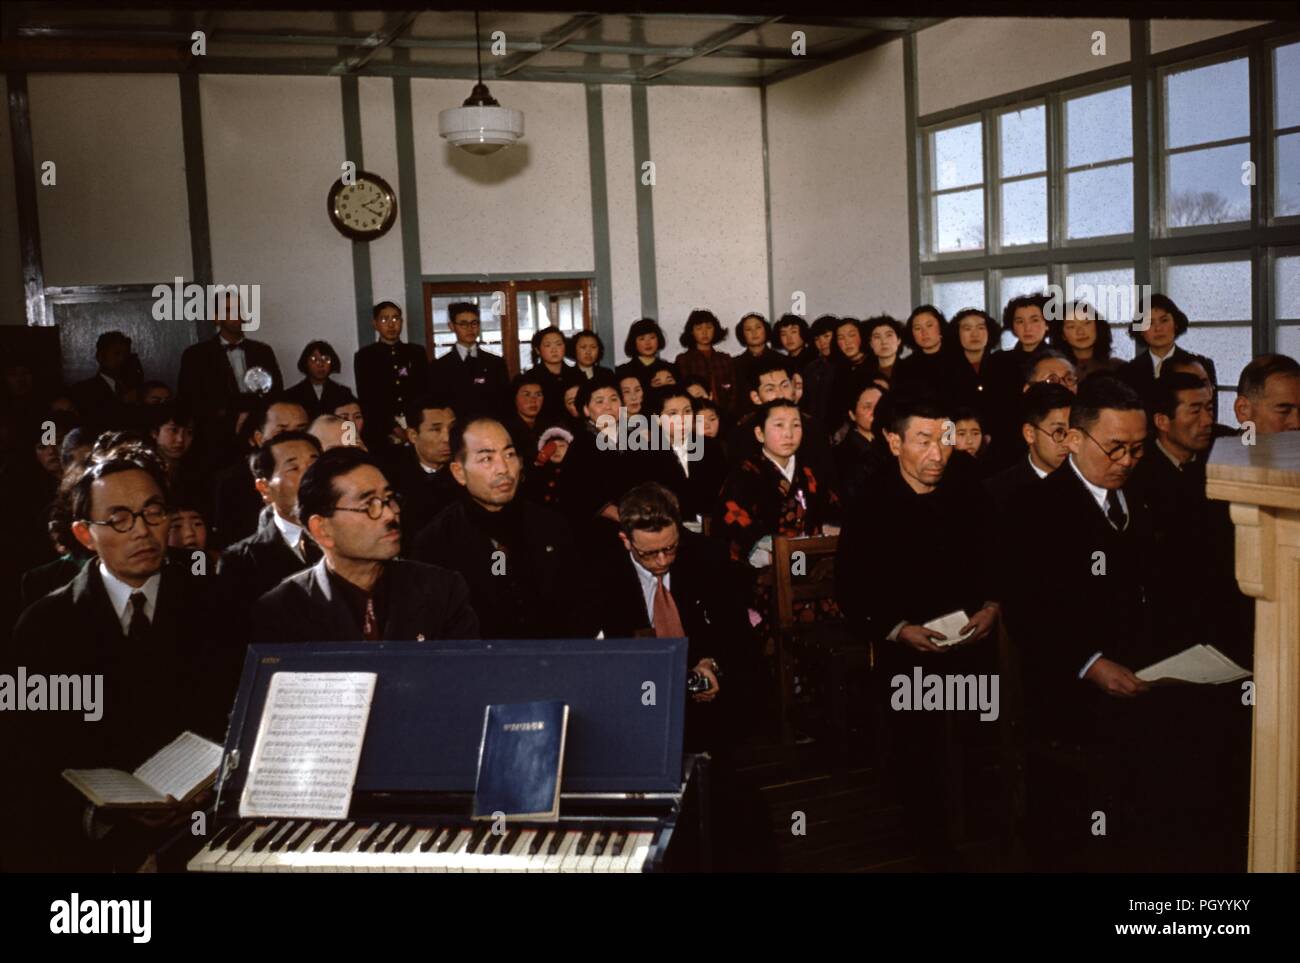 Large group of Japanese people worshiping at a Christian missionary church in post war Japan, with organ and hymn books in the foreground, 1955. () Stock Photo